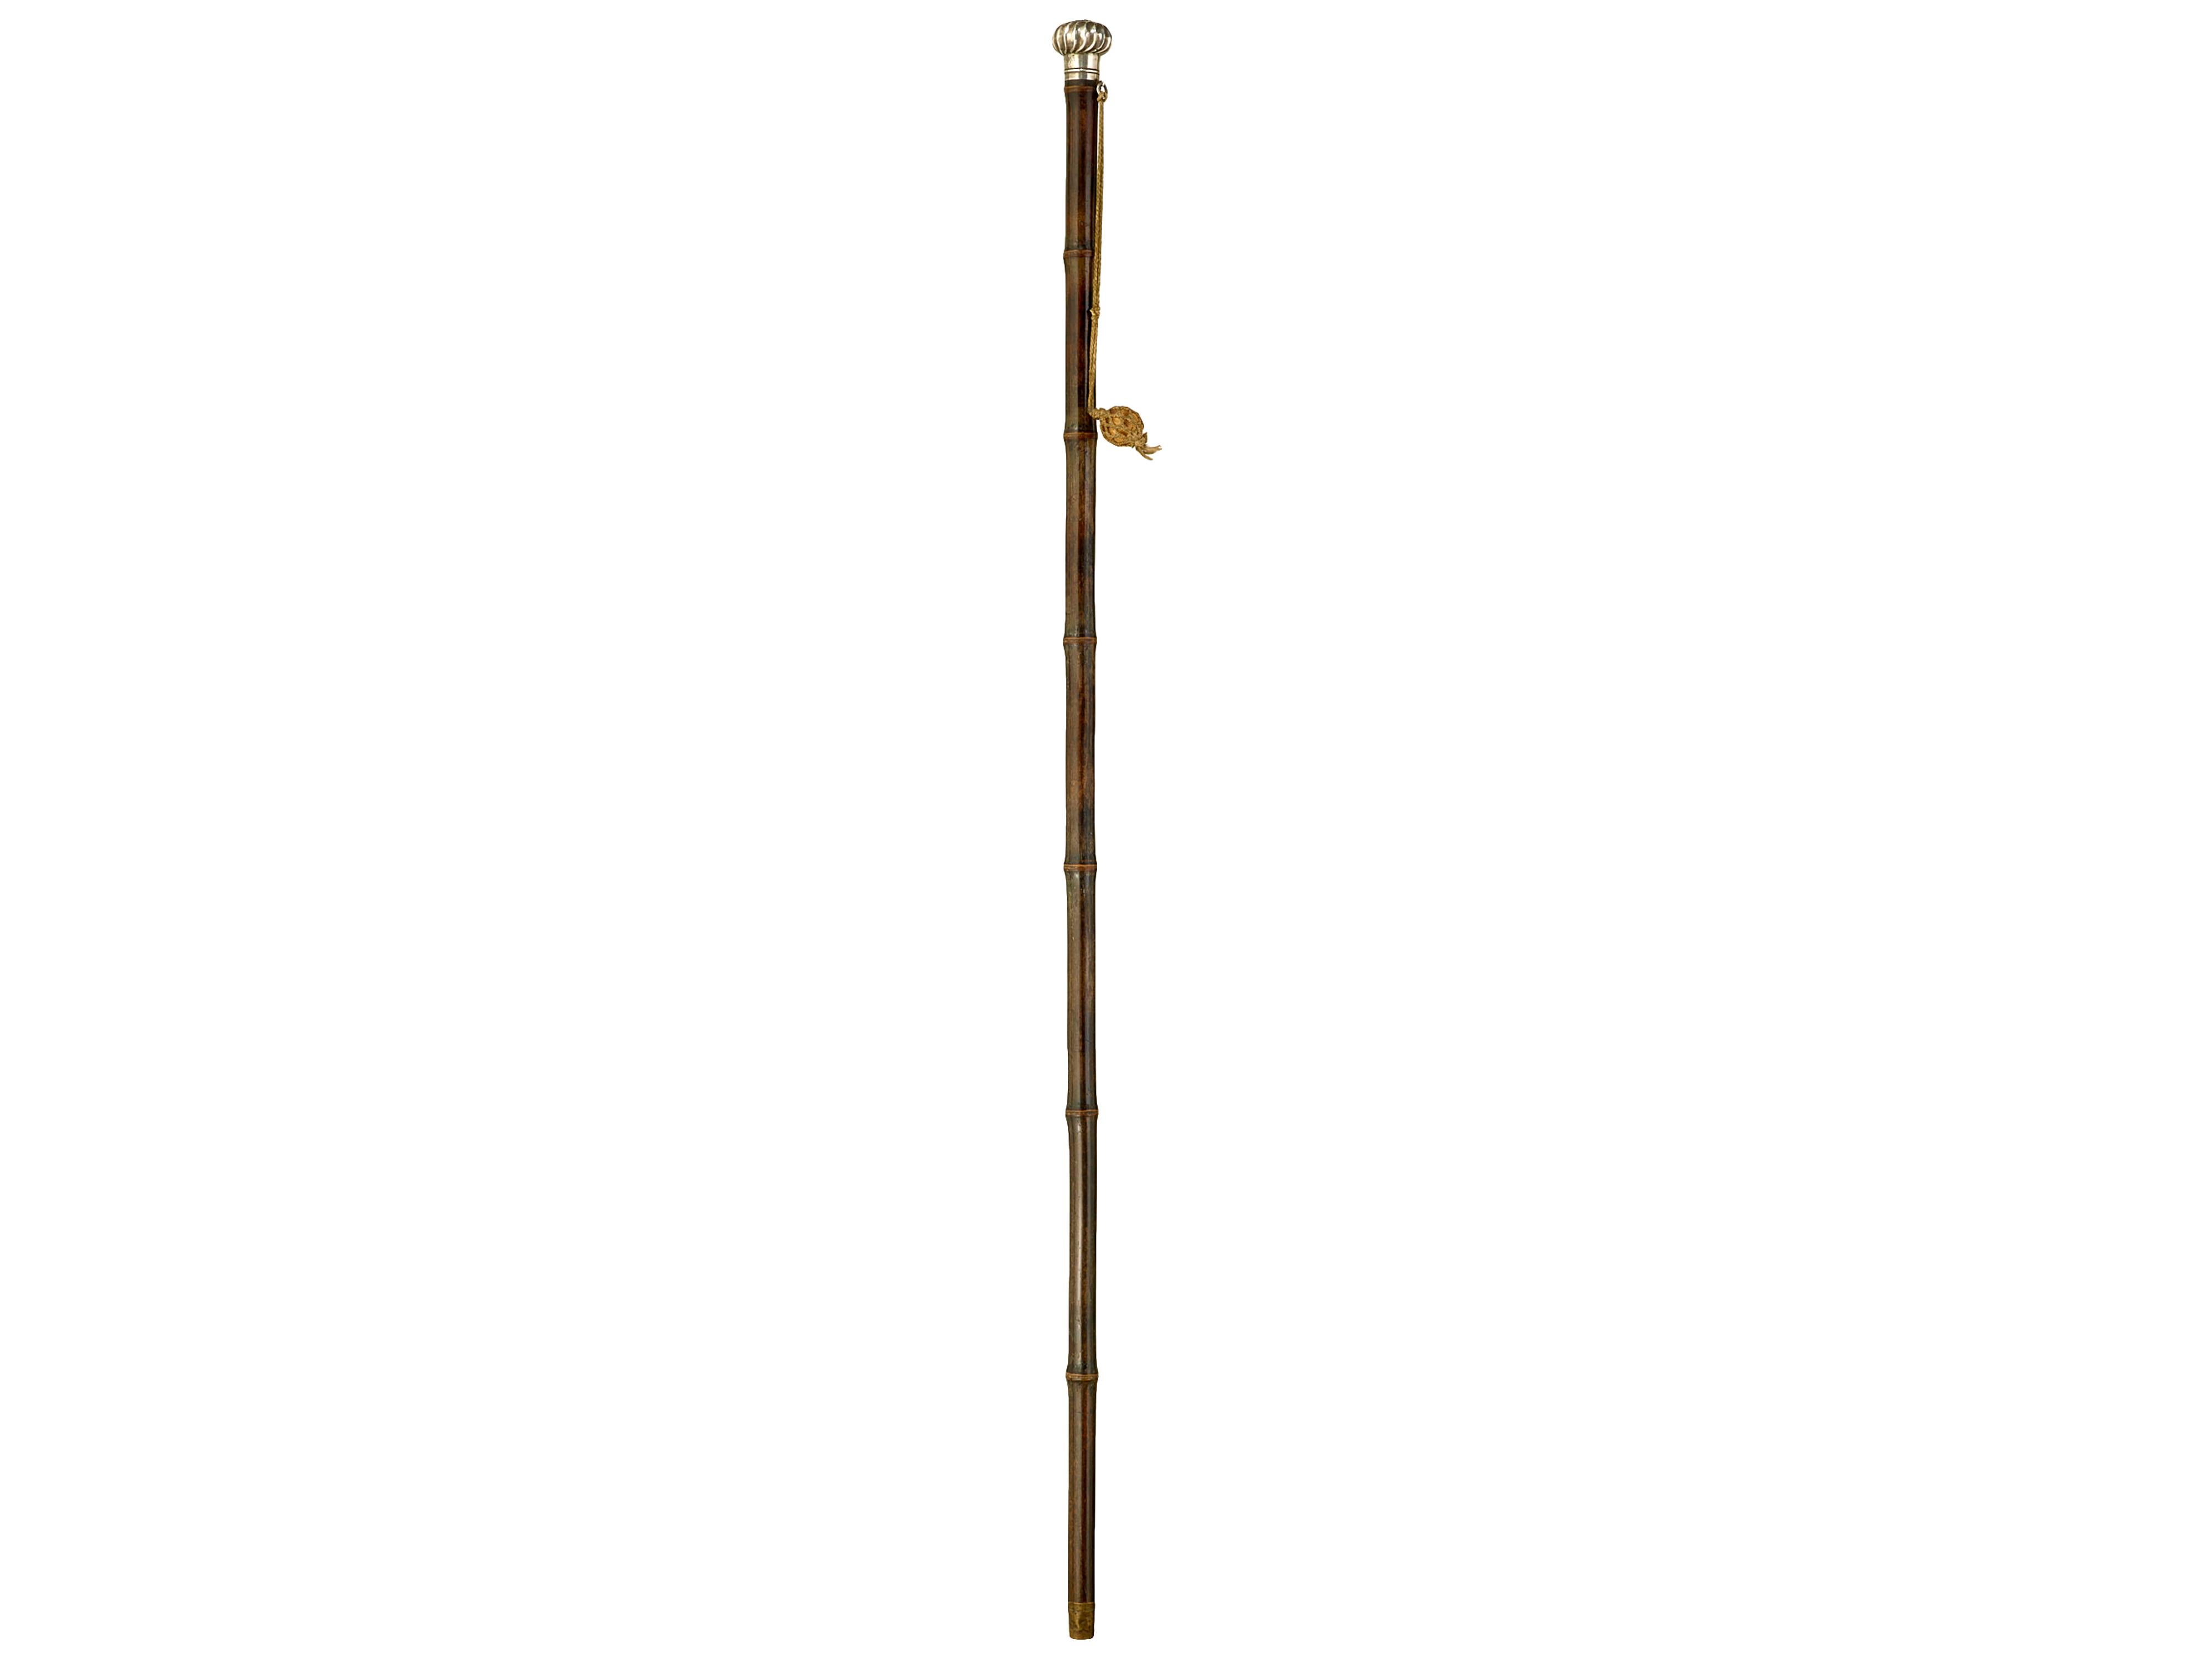 Patent Briggs pencil-stick walking cane. Pencil is spring-operated with pull cord. Original bamboo shaft. English hallmarked, 1892. London. For the races.
L 100cm, round top 4cm dia.